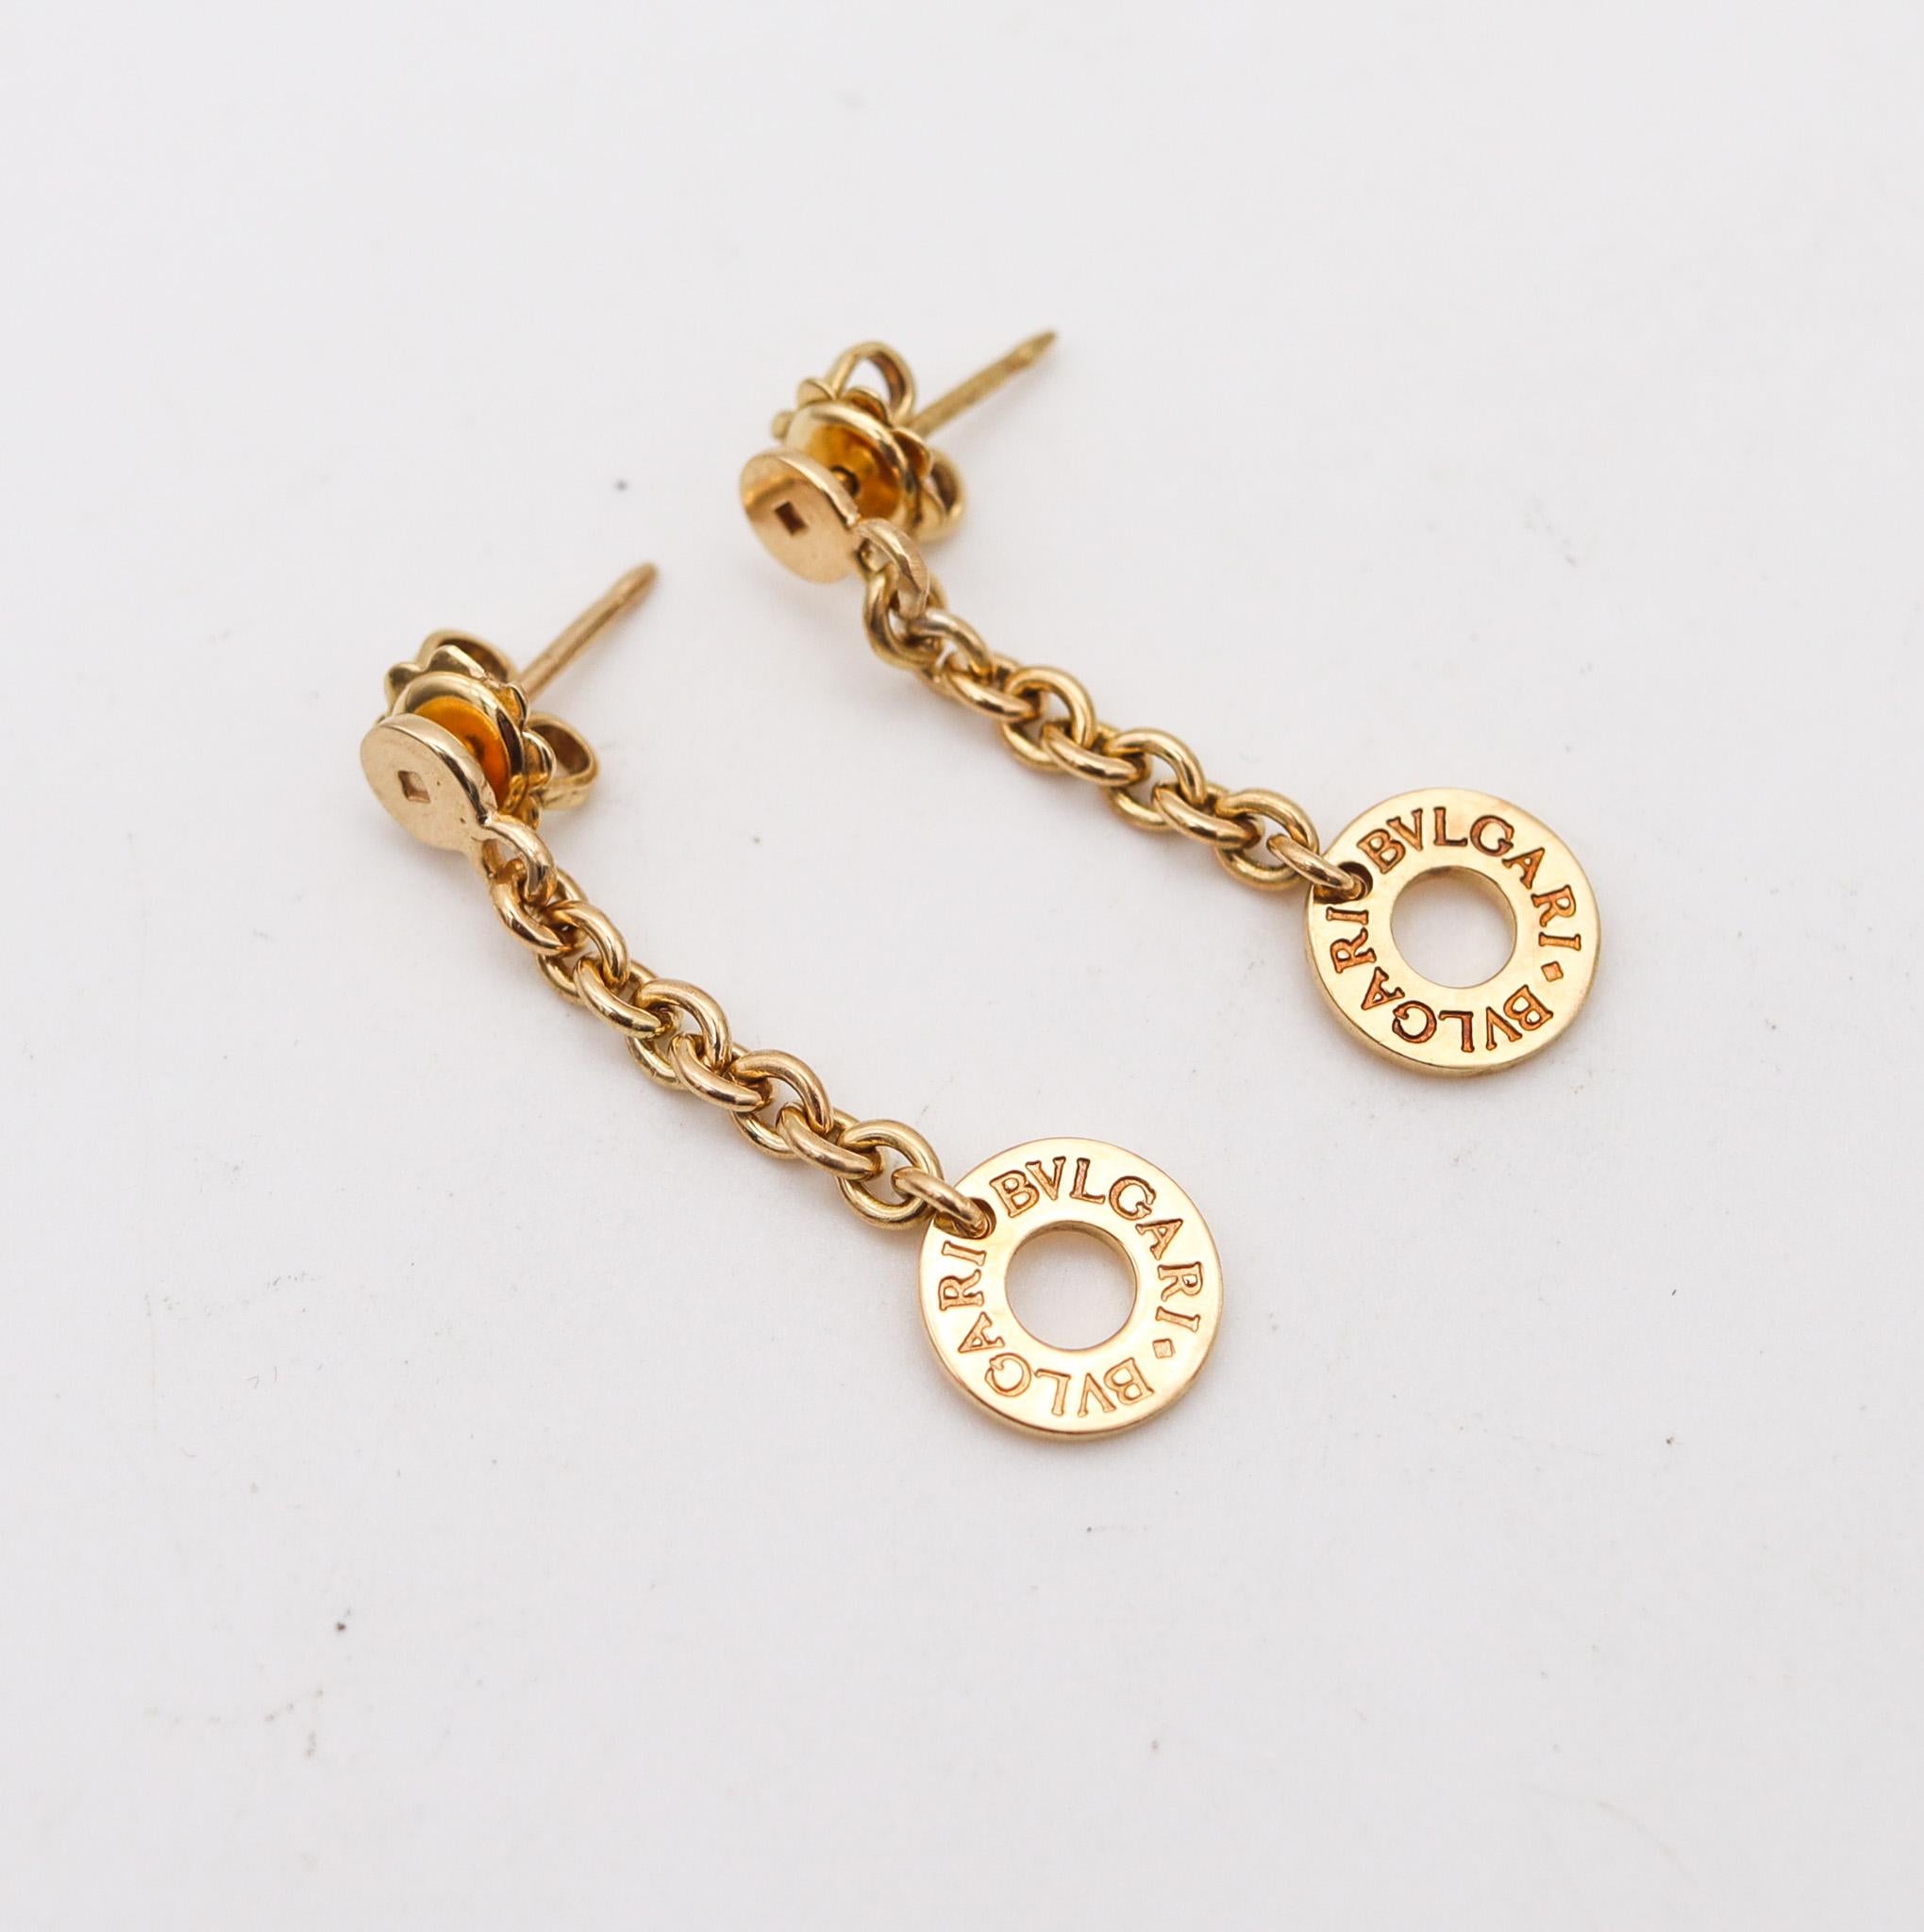 Bvlgari Bvlgari earrings designed by Bvlgari.

Nice pair of dangle drops earrings, created in Rome Italy by the jewelry house of Bvlgari. Crafted with links chain in solid yellow gold of 18 karats with high polished finish. Fitted at the reverse